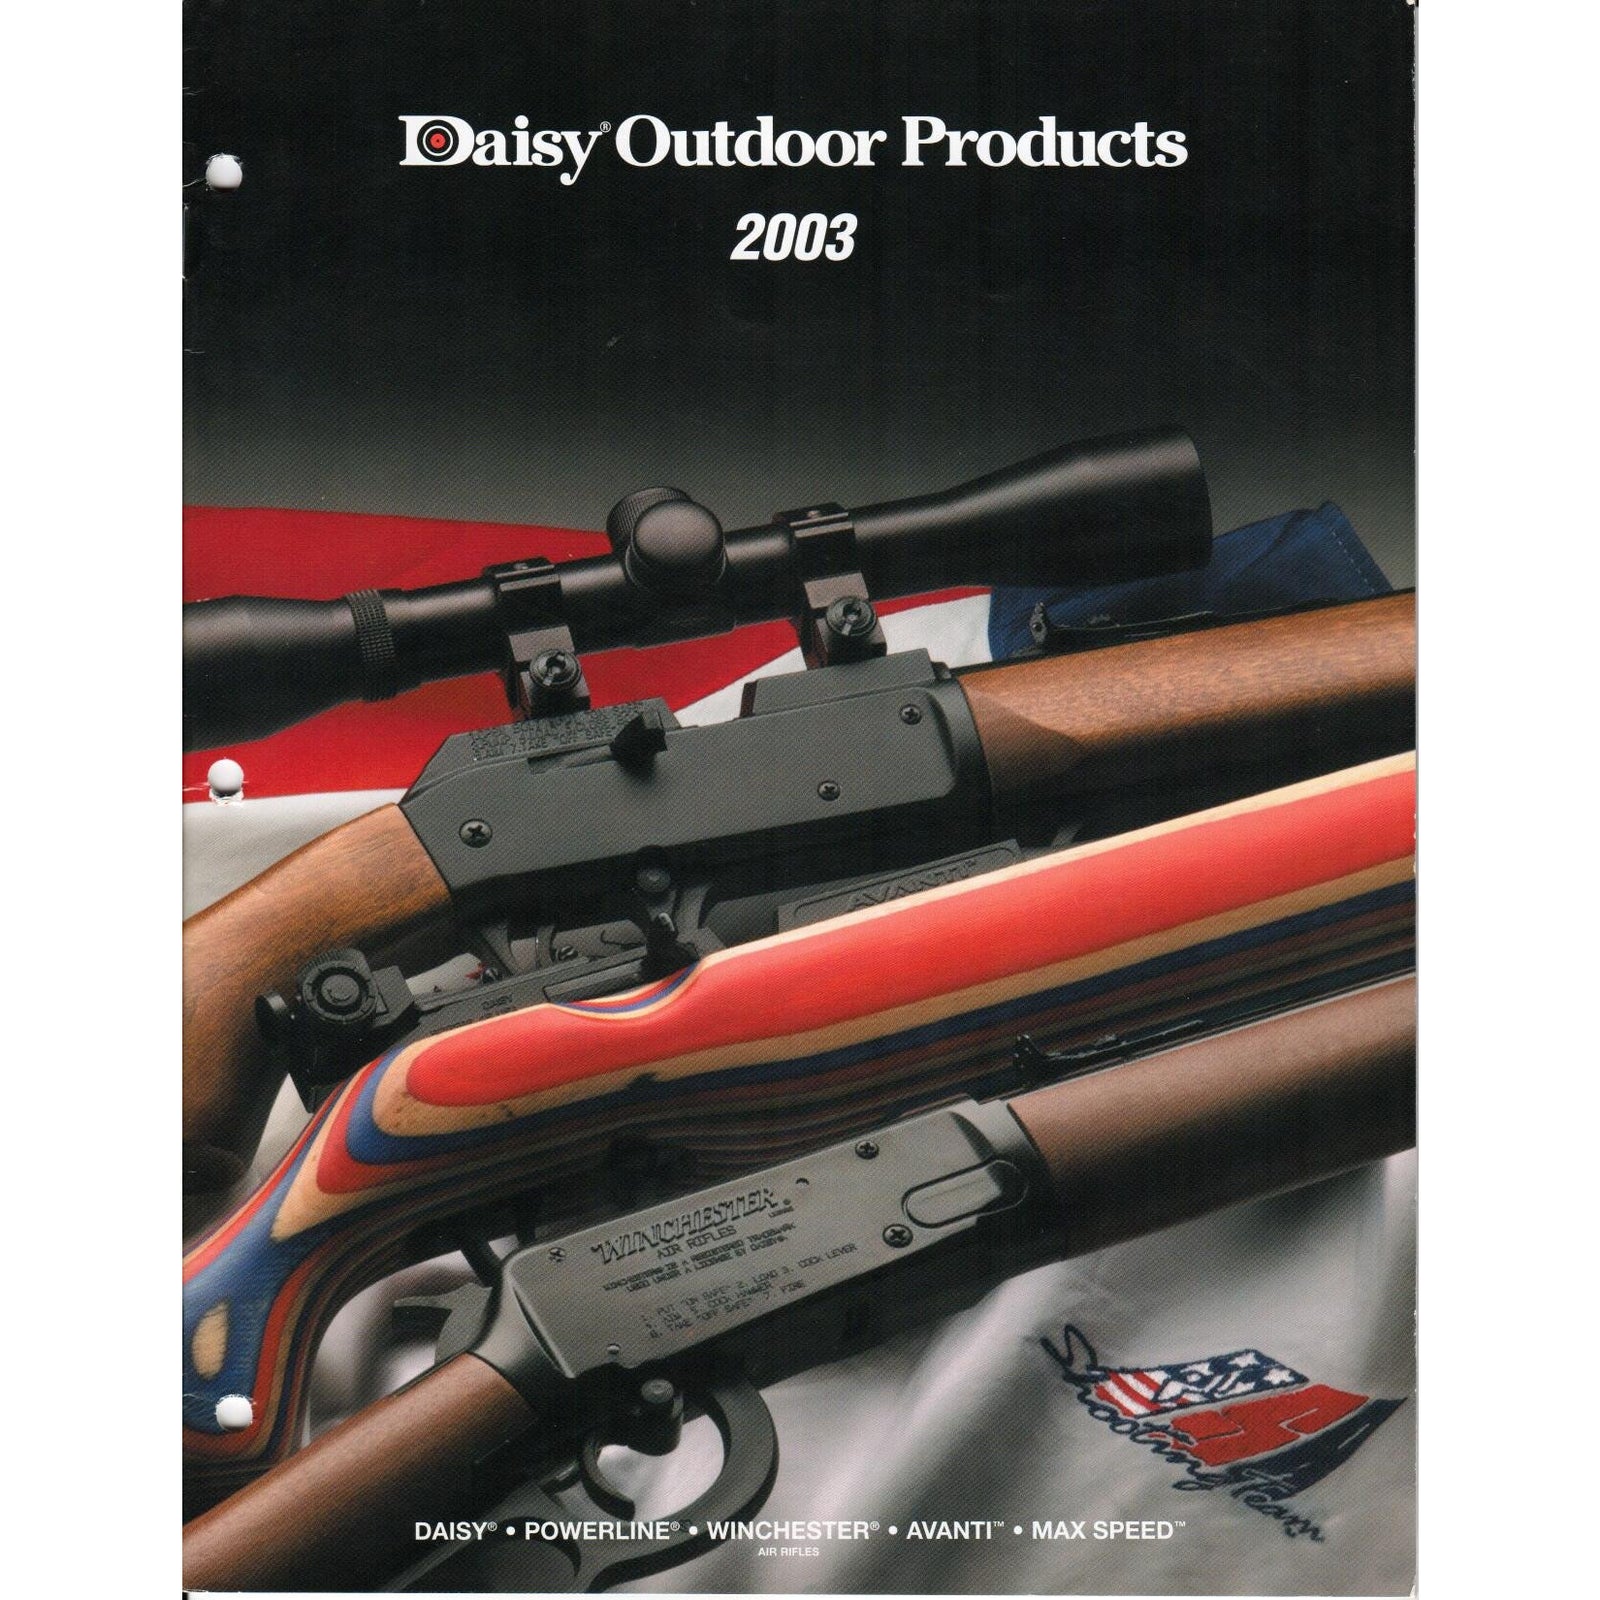 Daisy Outdoor Products 2003